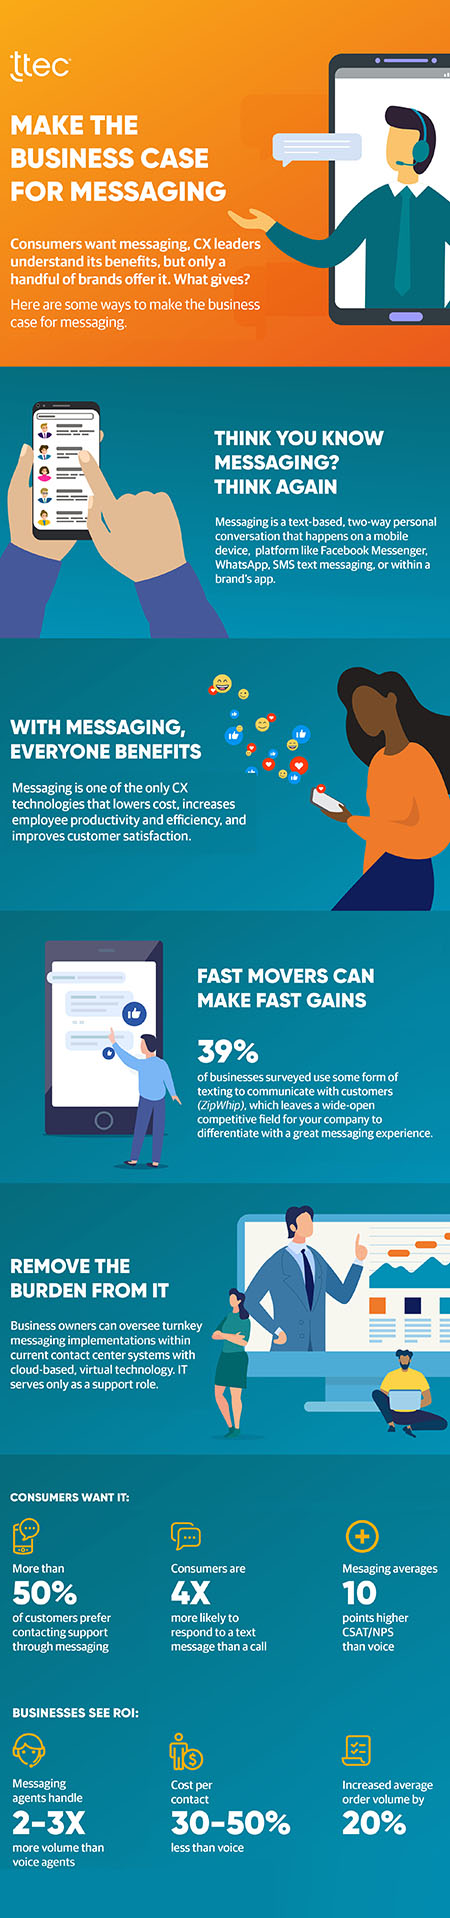 infographic showing the benefits of conversational messaing for improving operational KPIs